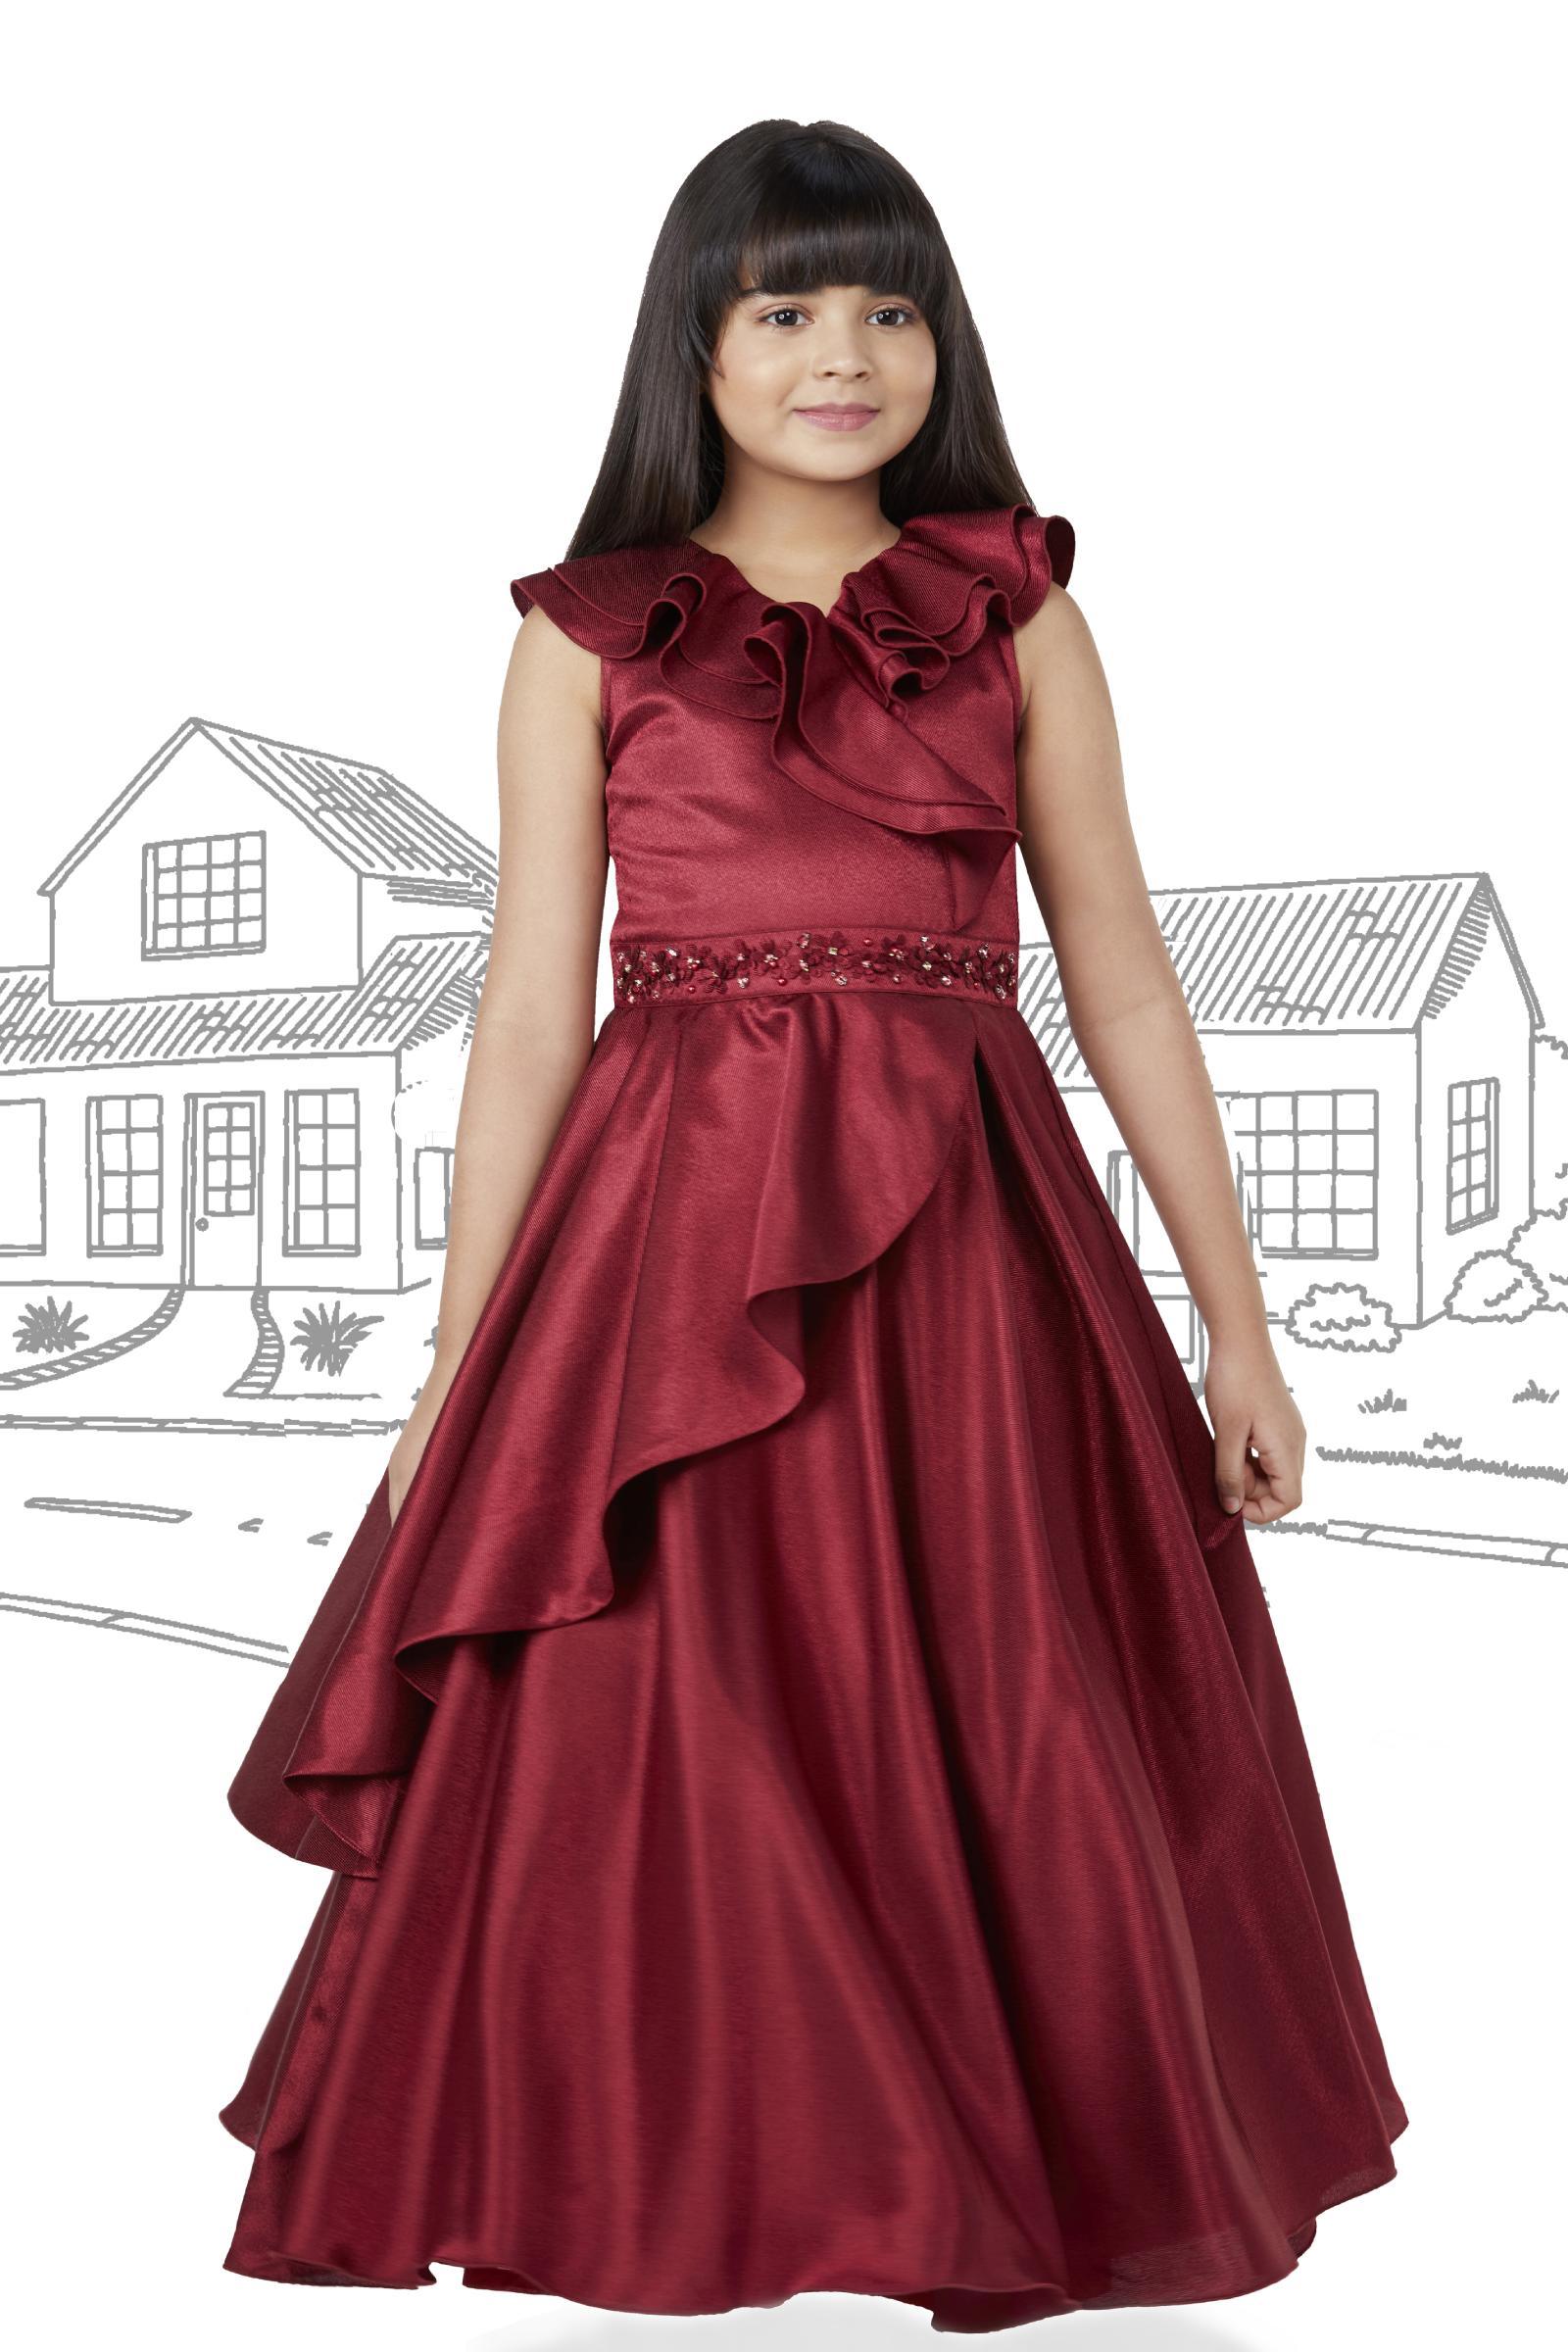 Elegant Maroon Satin Multi-layered Party Frock With Floral Embellishment  For Girls – Lagorii Kids